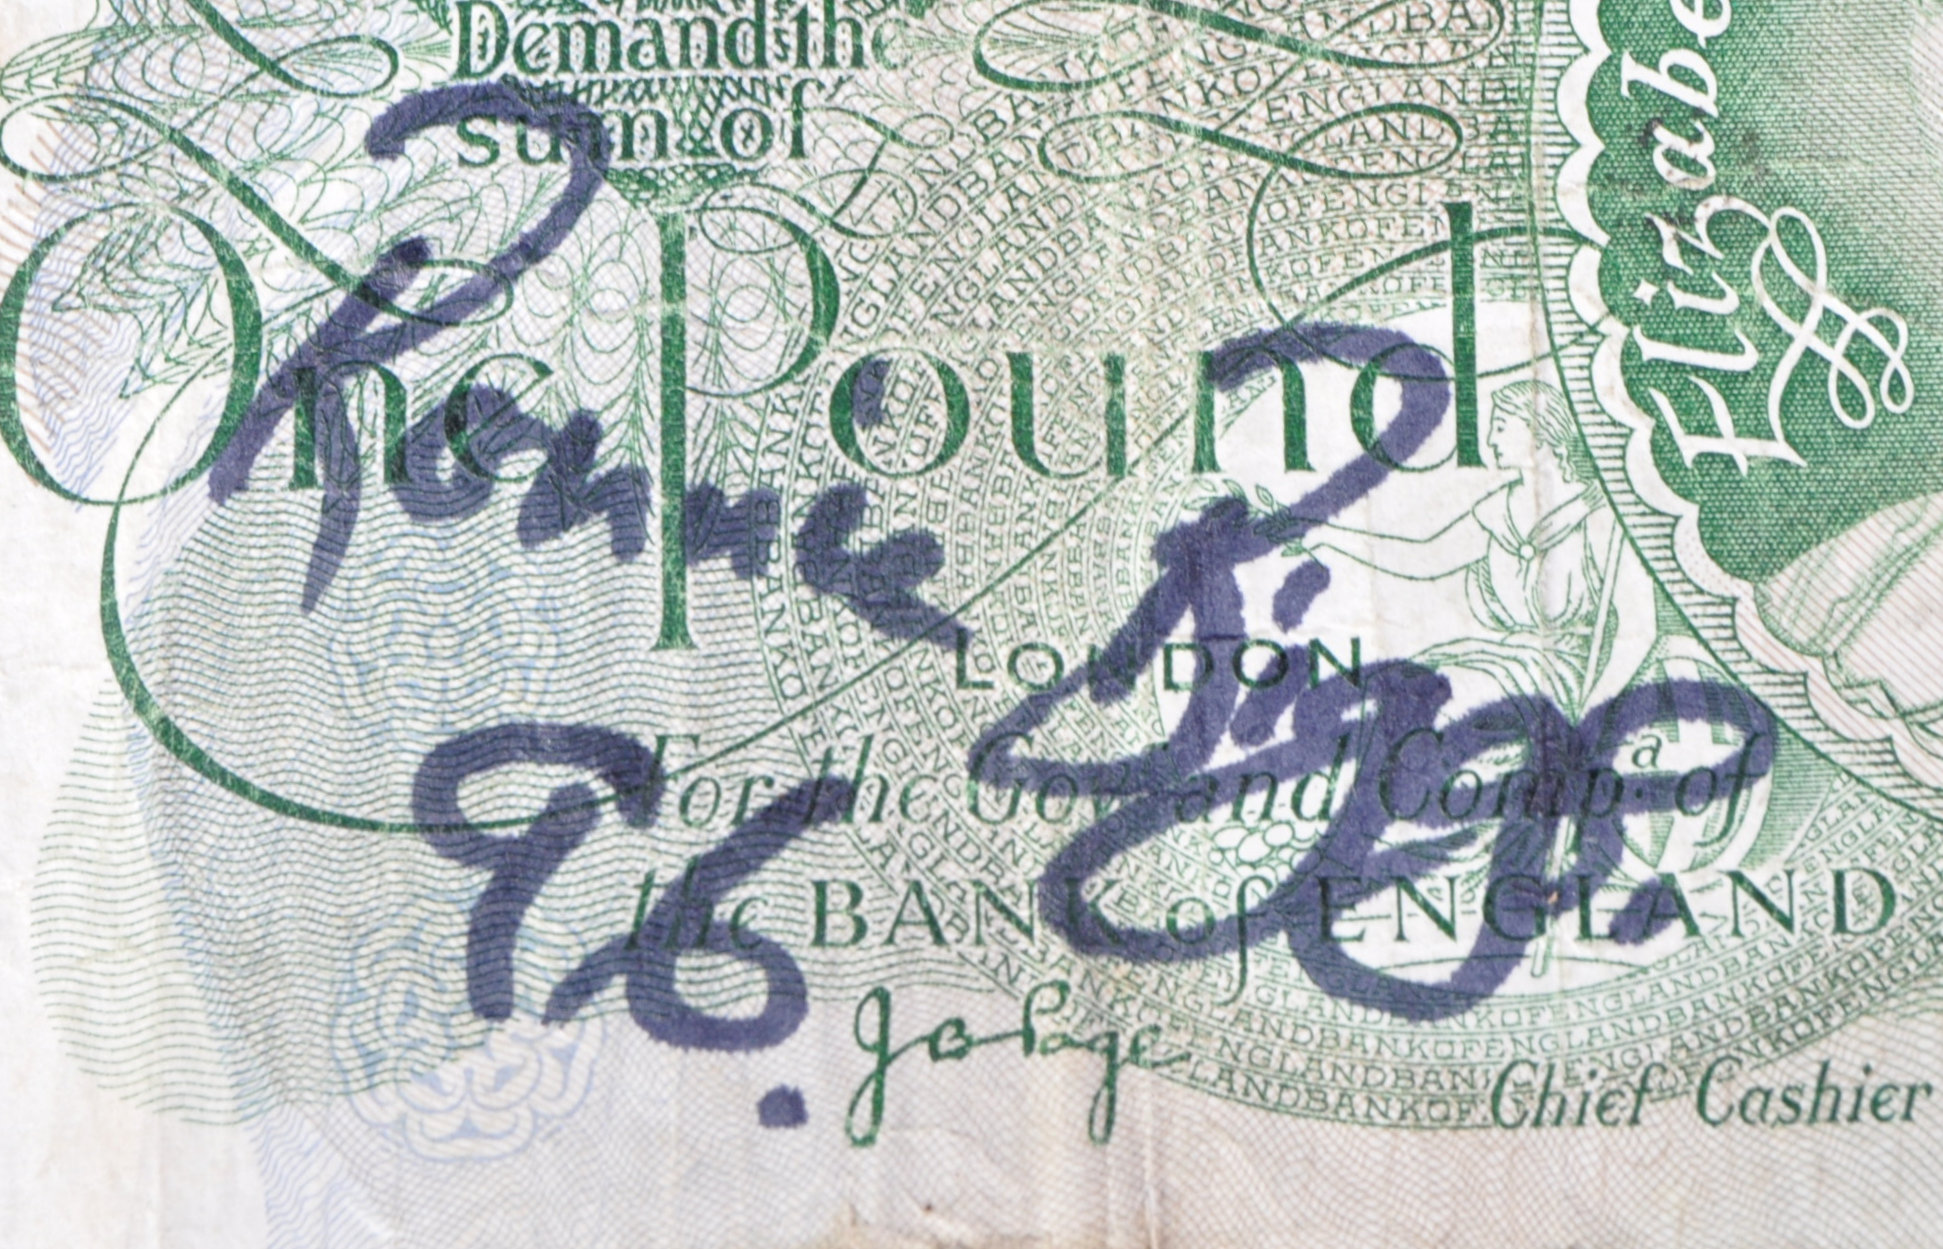 GREAT TRAIN ROBBERY - BRIAN STONE & RONNIE BIGGS SIGNED BANK NOTES - Image 2 of 5